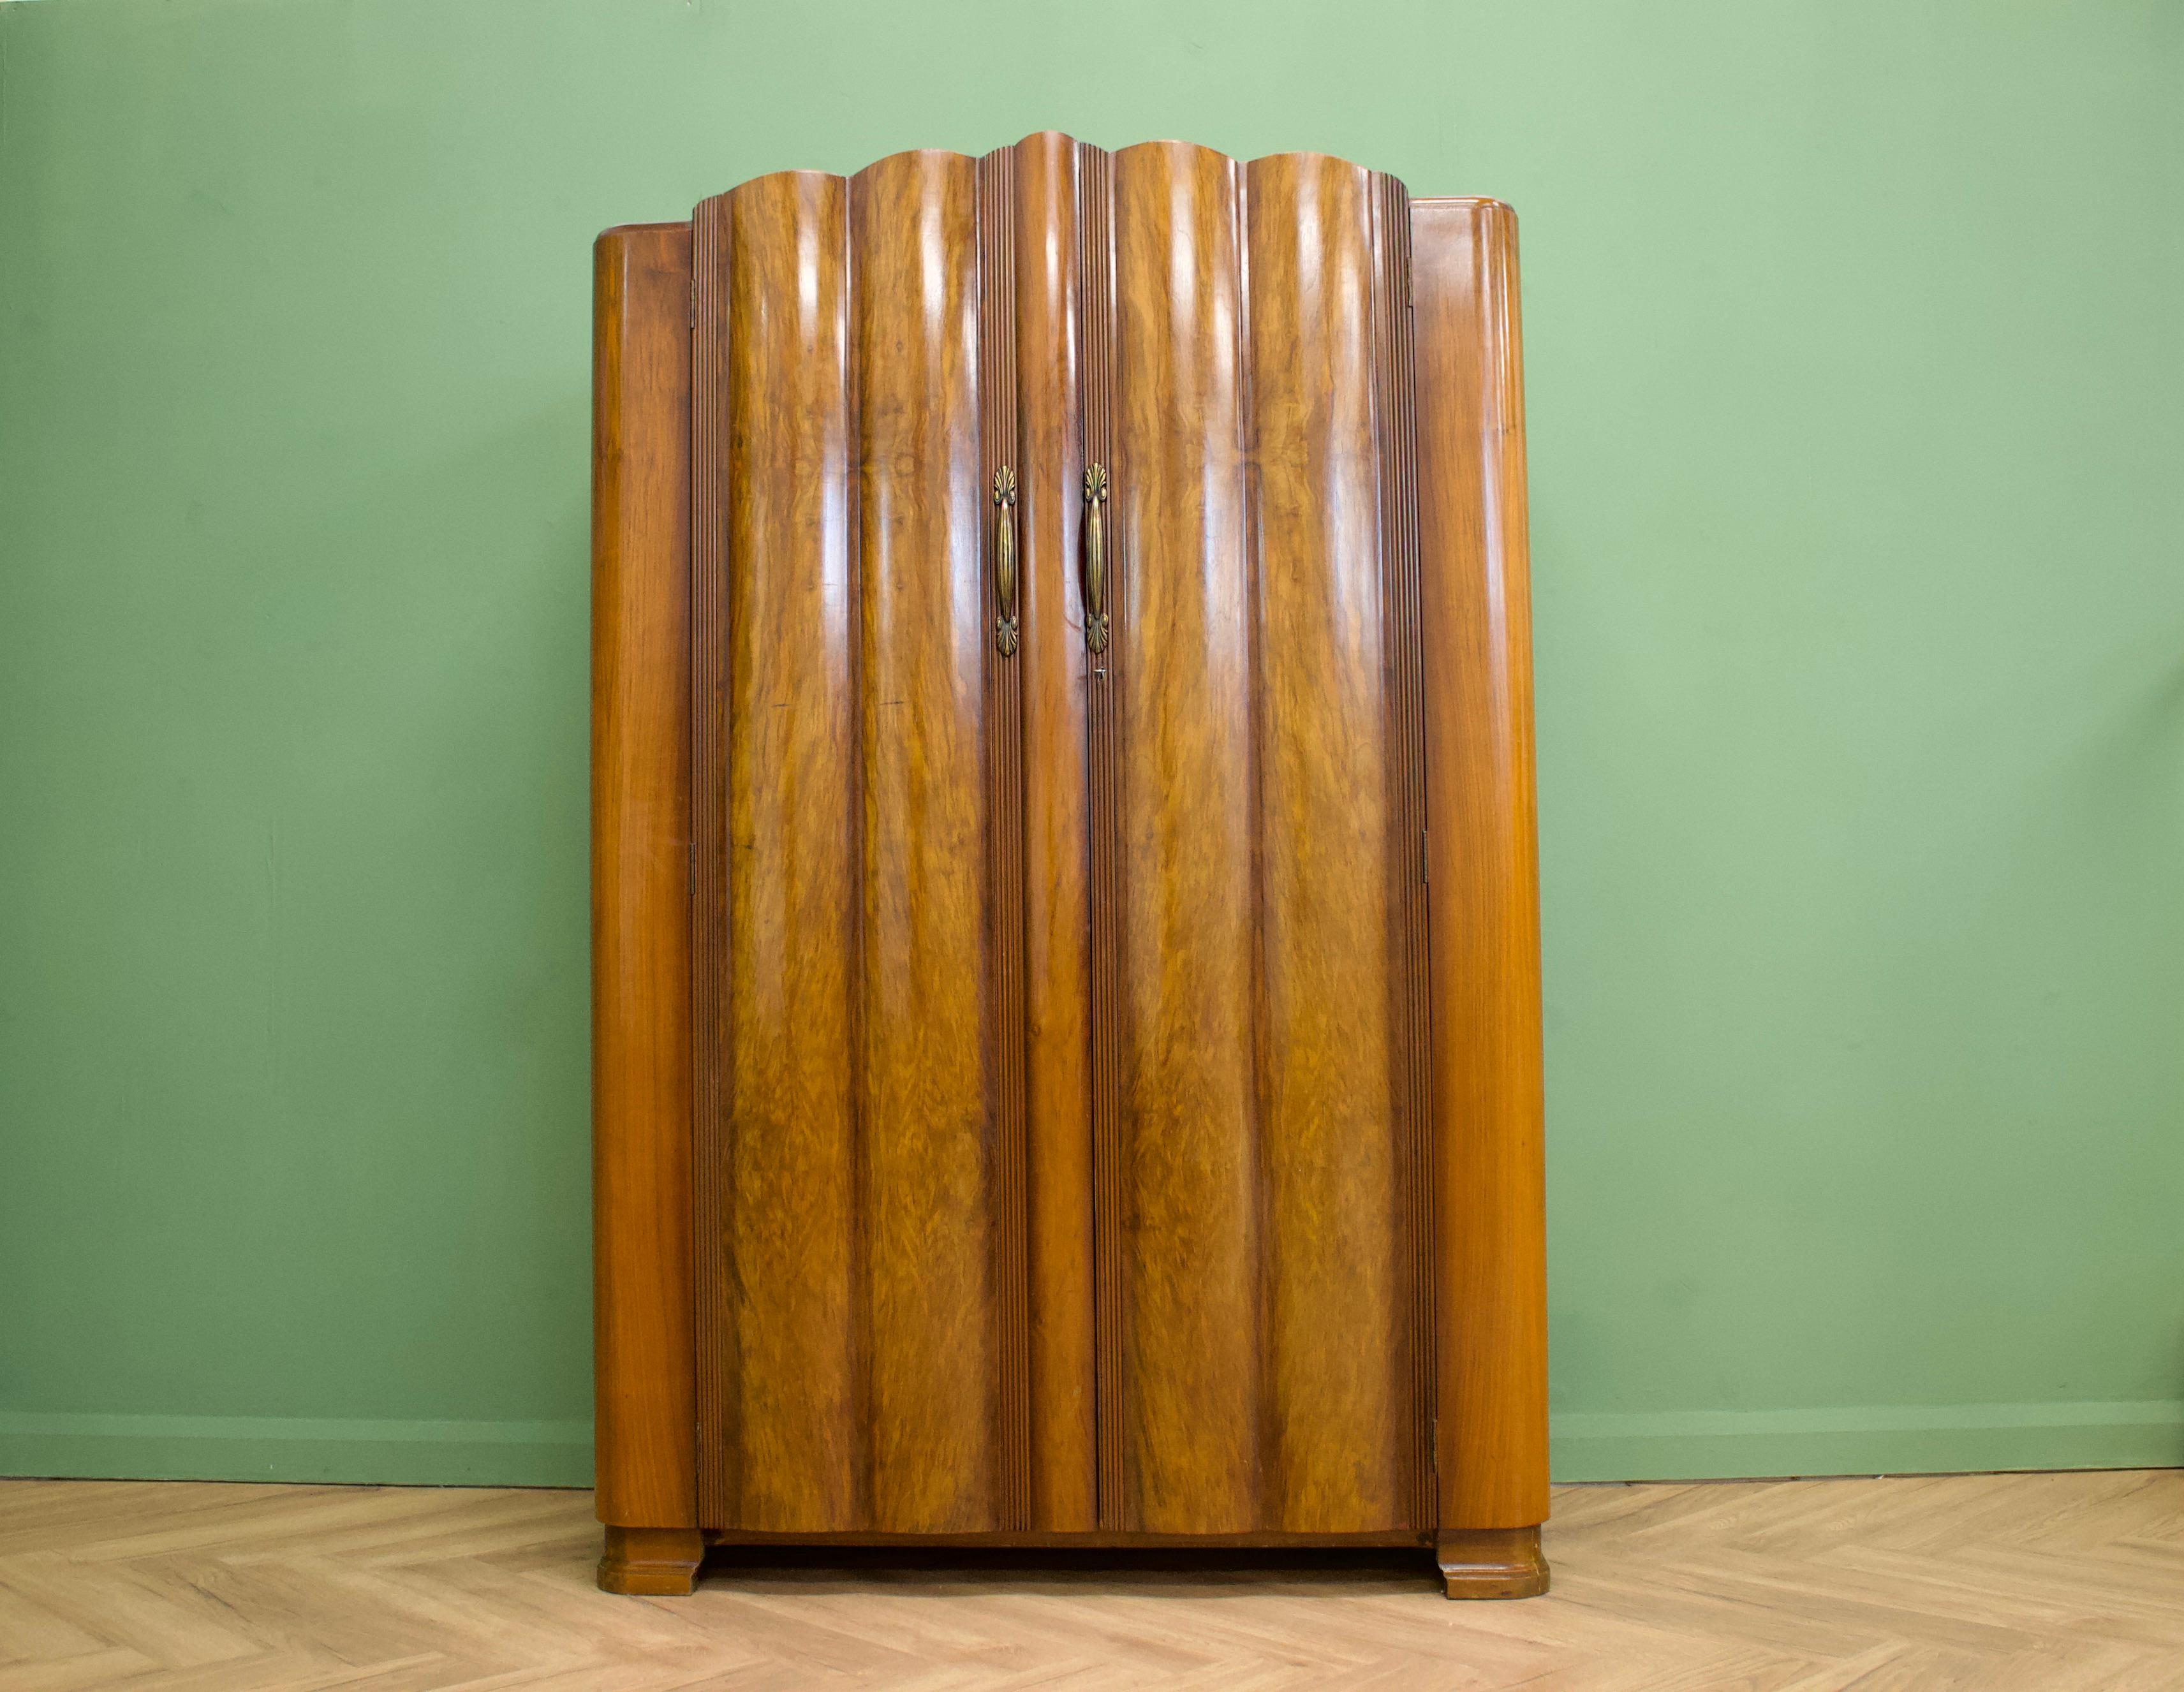 -- Art Deco style serpentine wardrobe
- Manufactured in the UK by Harris Lebus
- Featuring a serpentine front
- Two rails and a shelf.
   